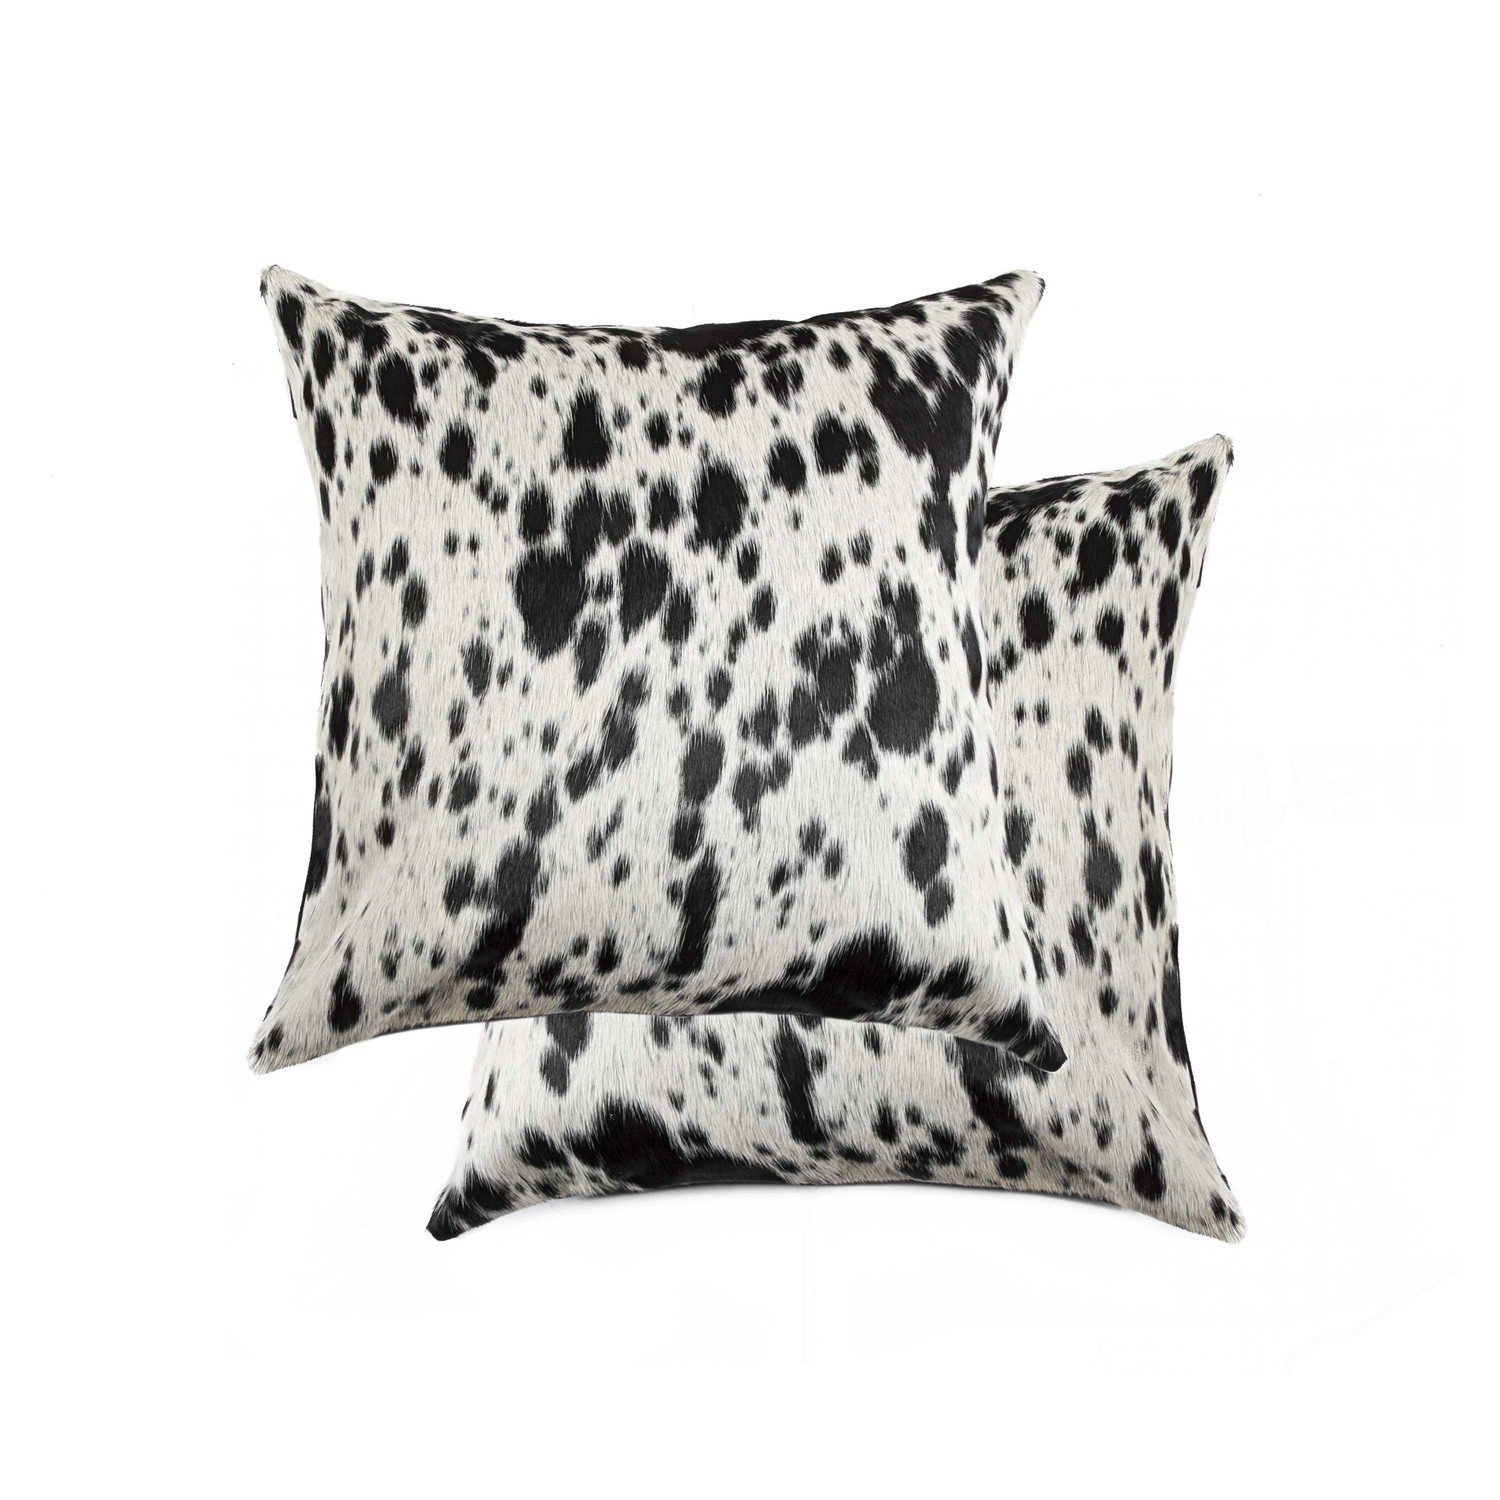 16"X16" Salt And Pepper, Black And White, Cowhide - Pillow 2-Pack